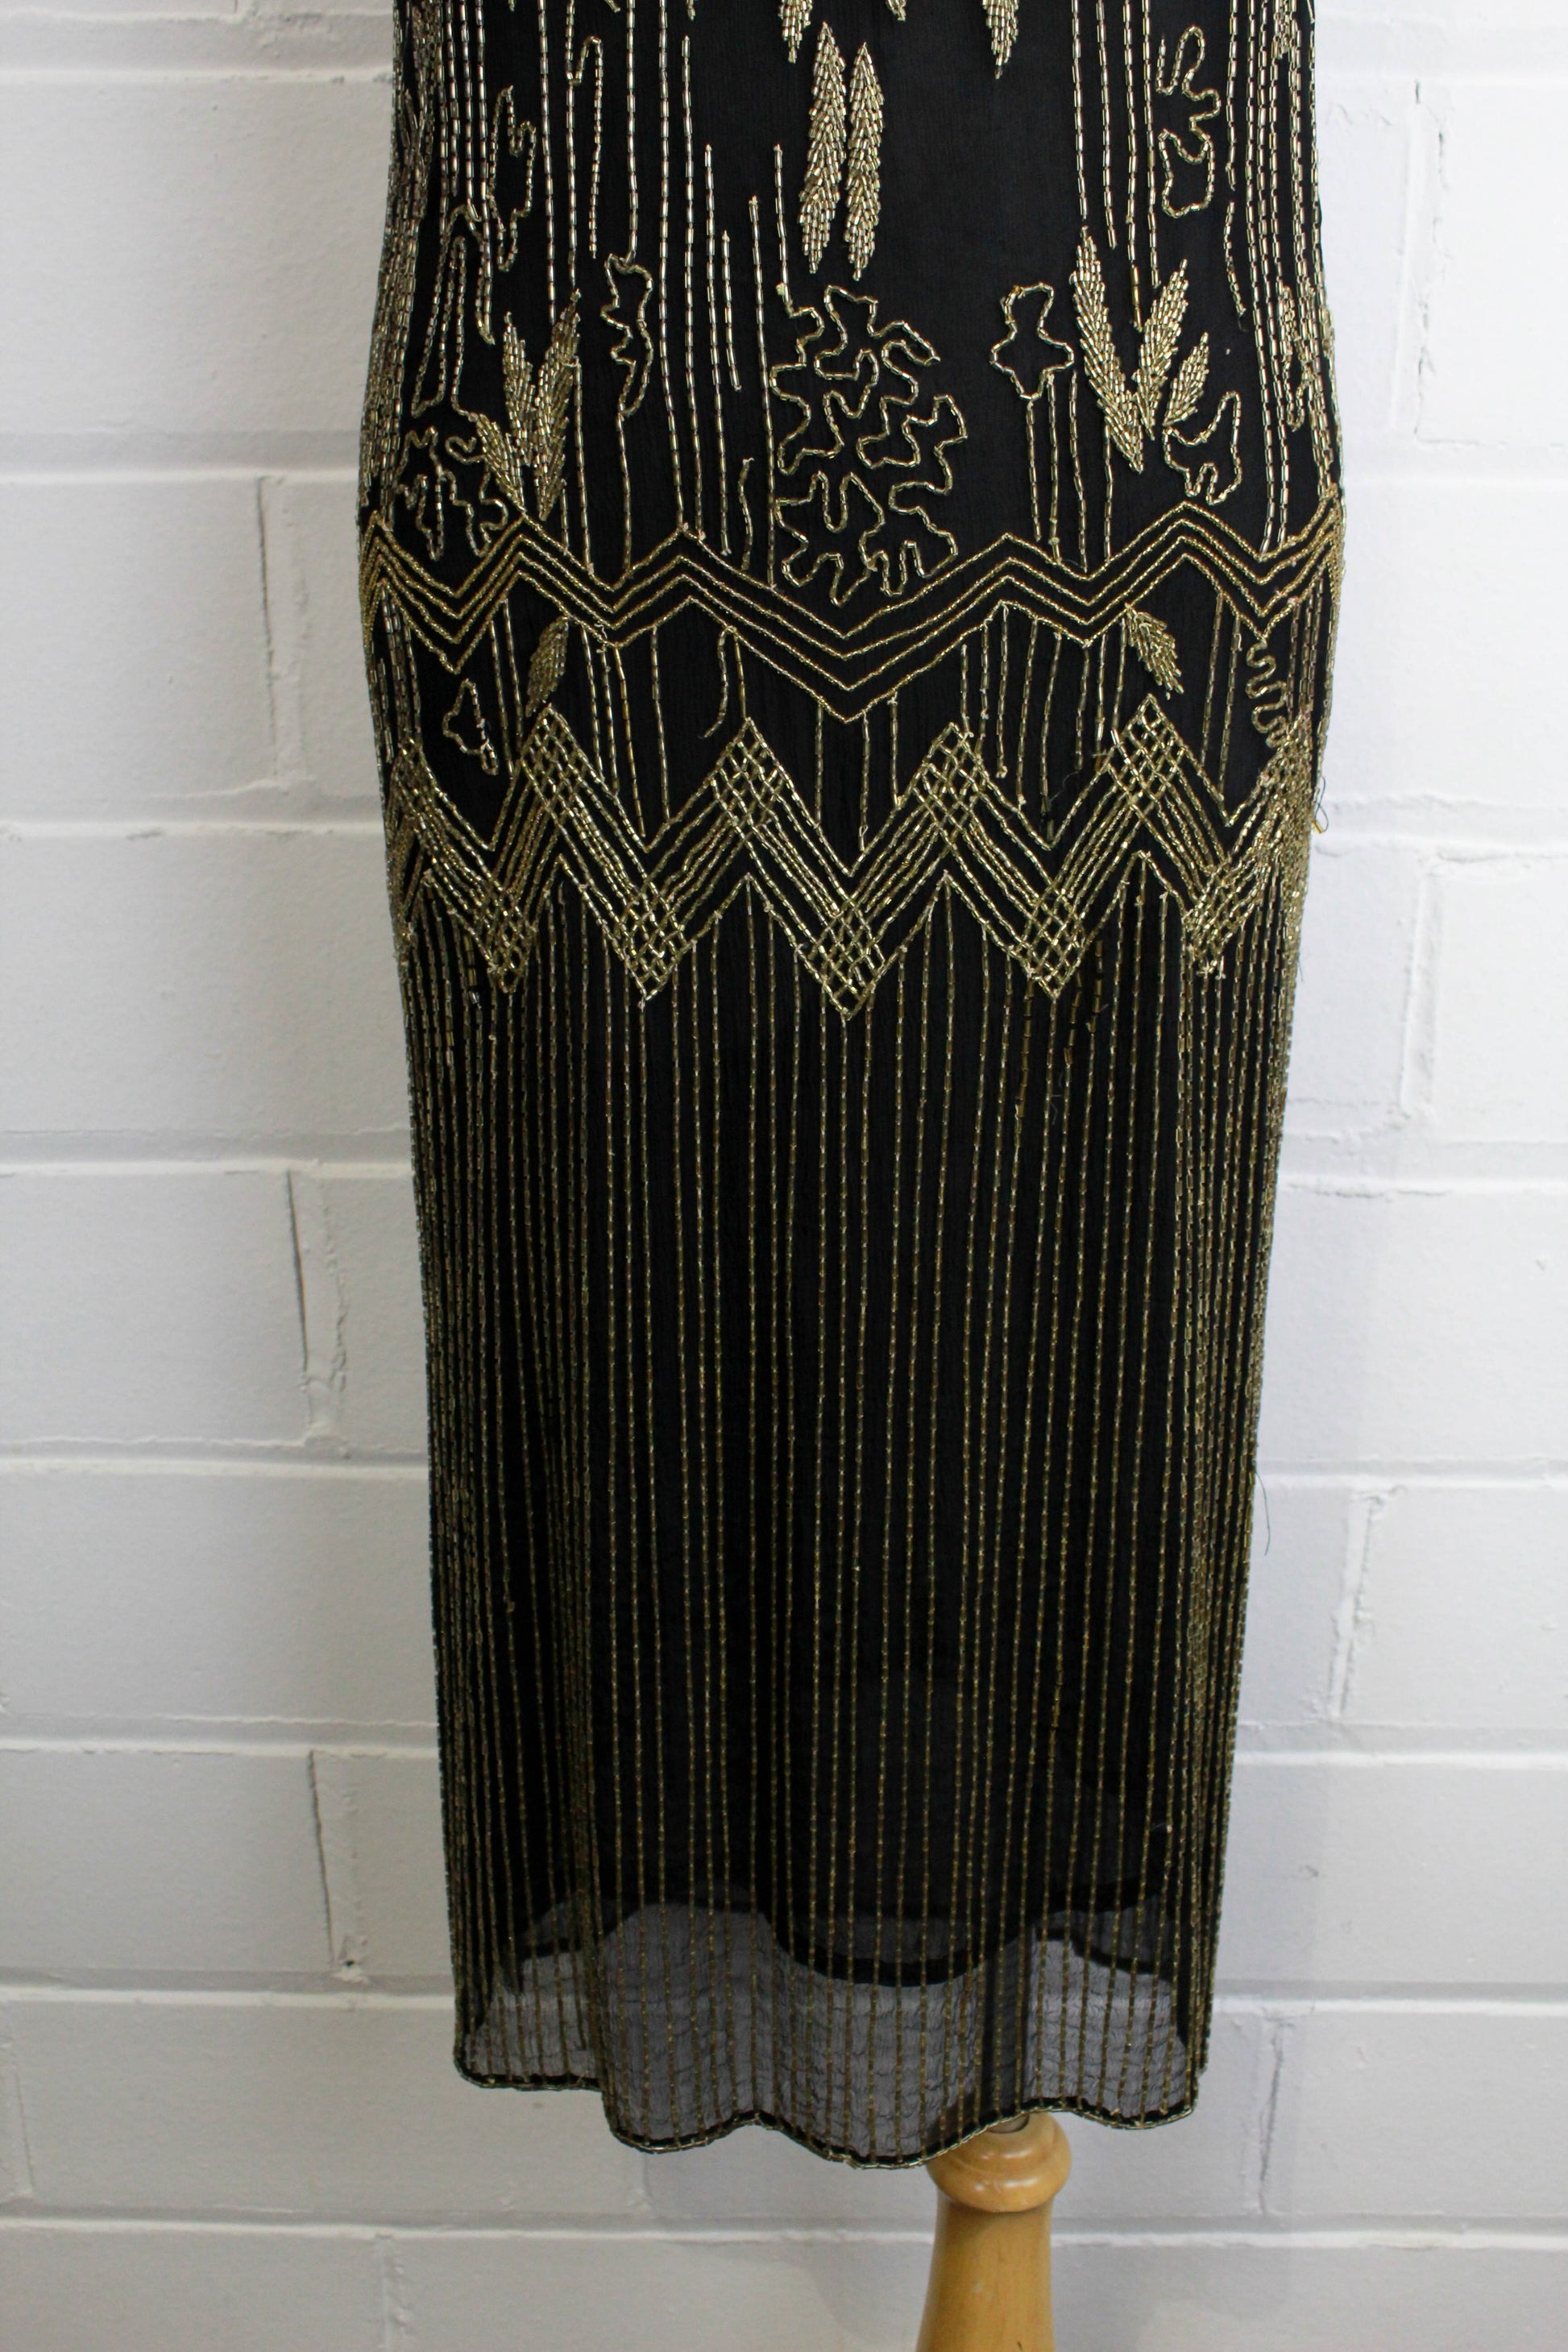 Vintage 1920s Black Beaded Dress with issues, Sheer Crepe Chiffon